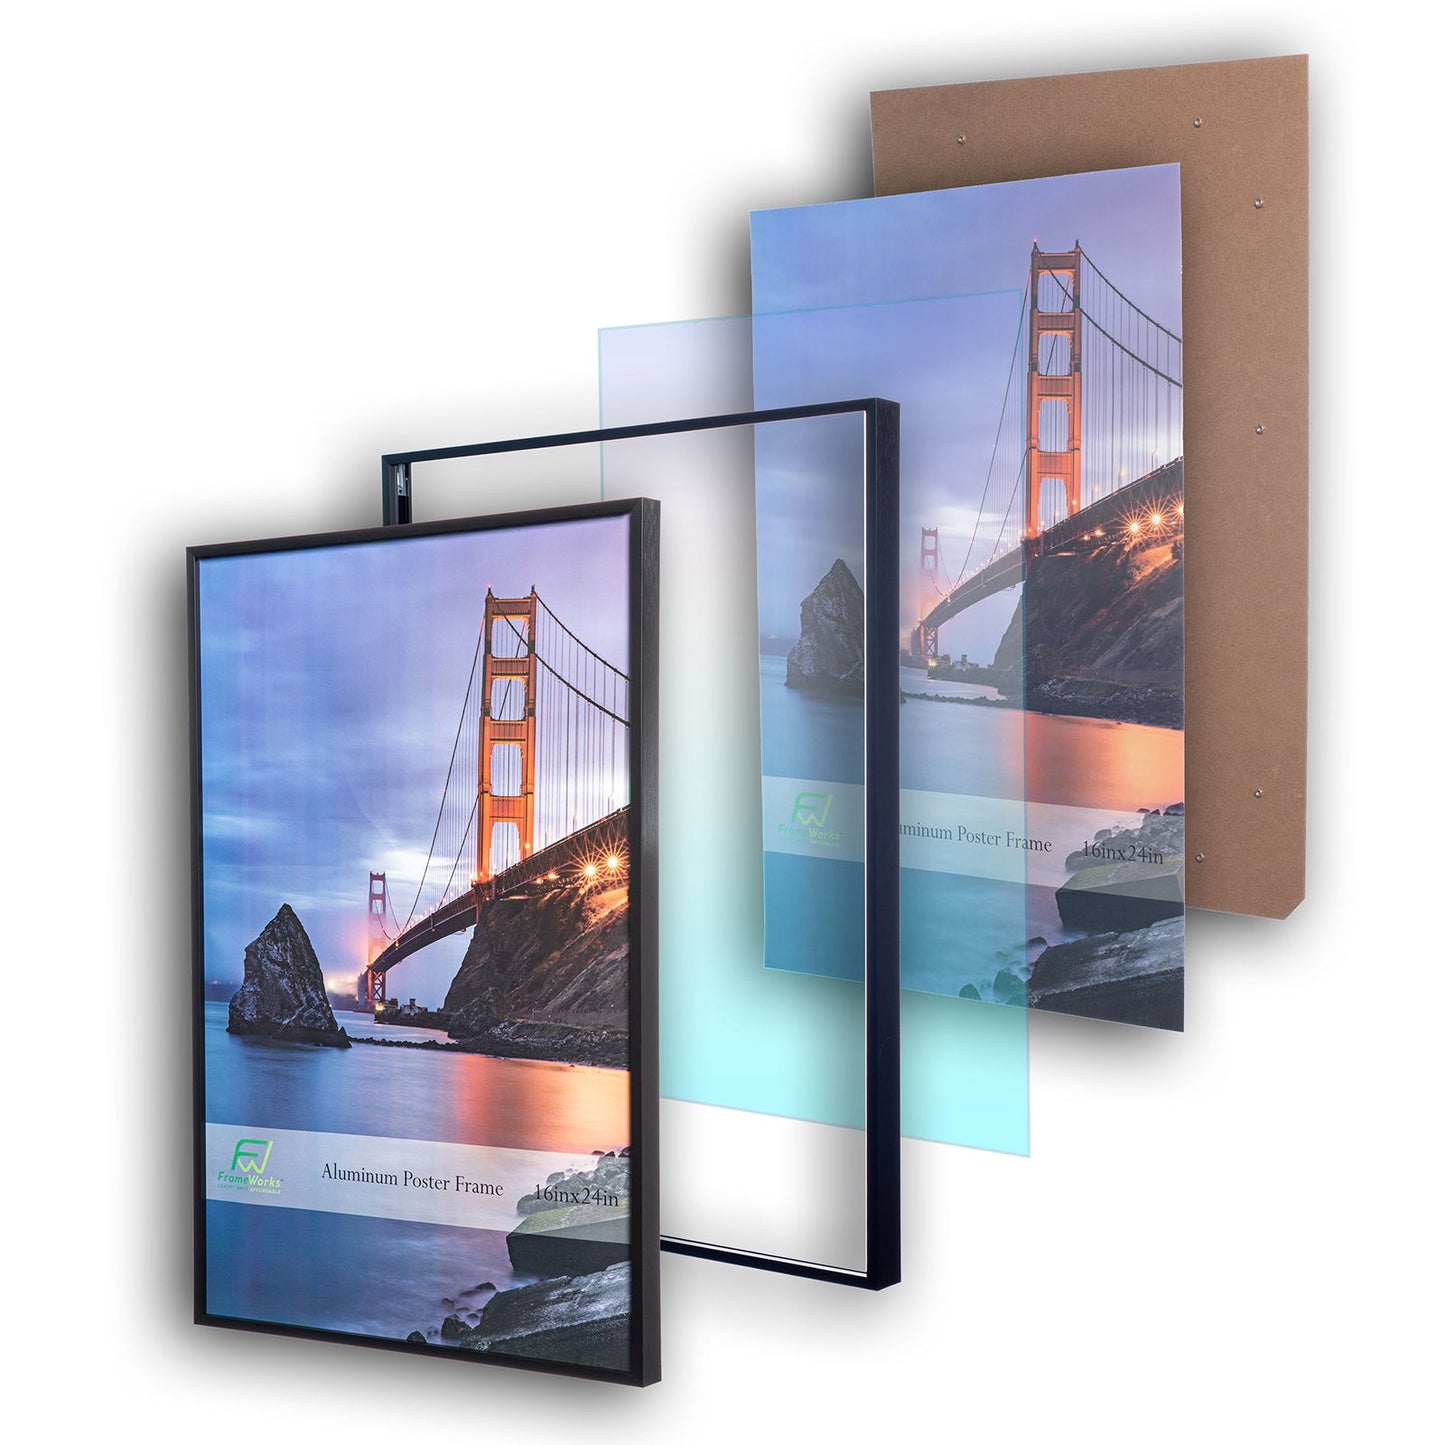 16" x 24" Black Brushed Aluminum Poster Picture Frame with Plexiglass